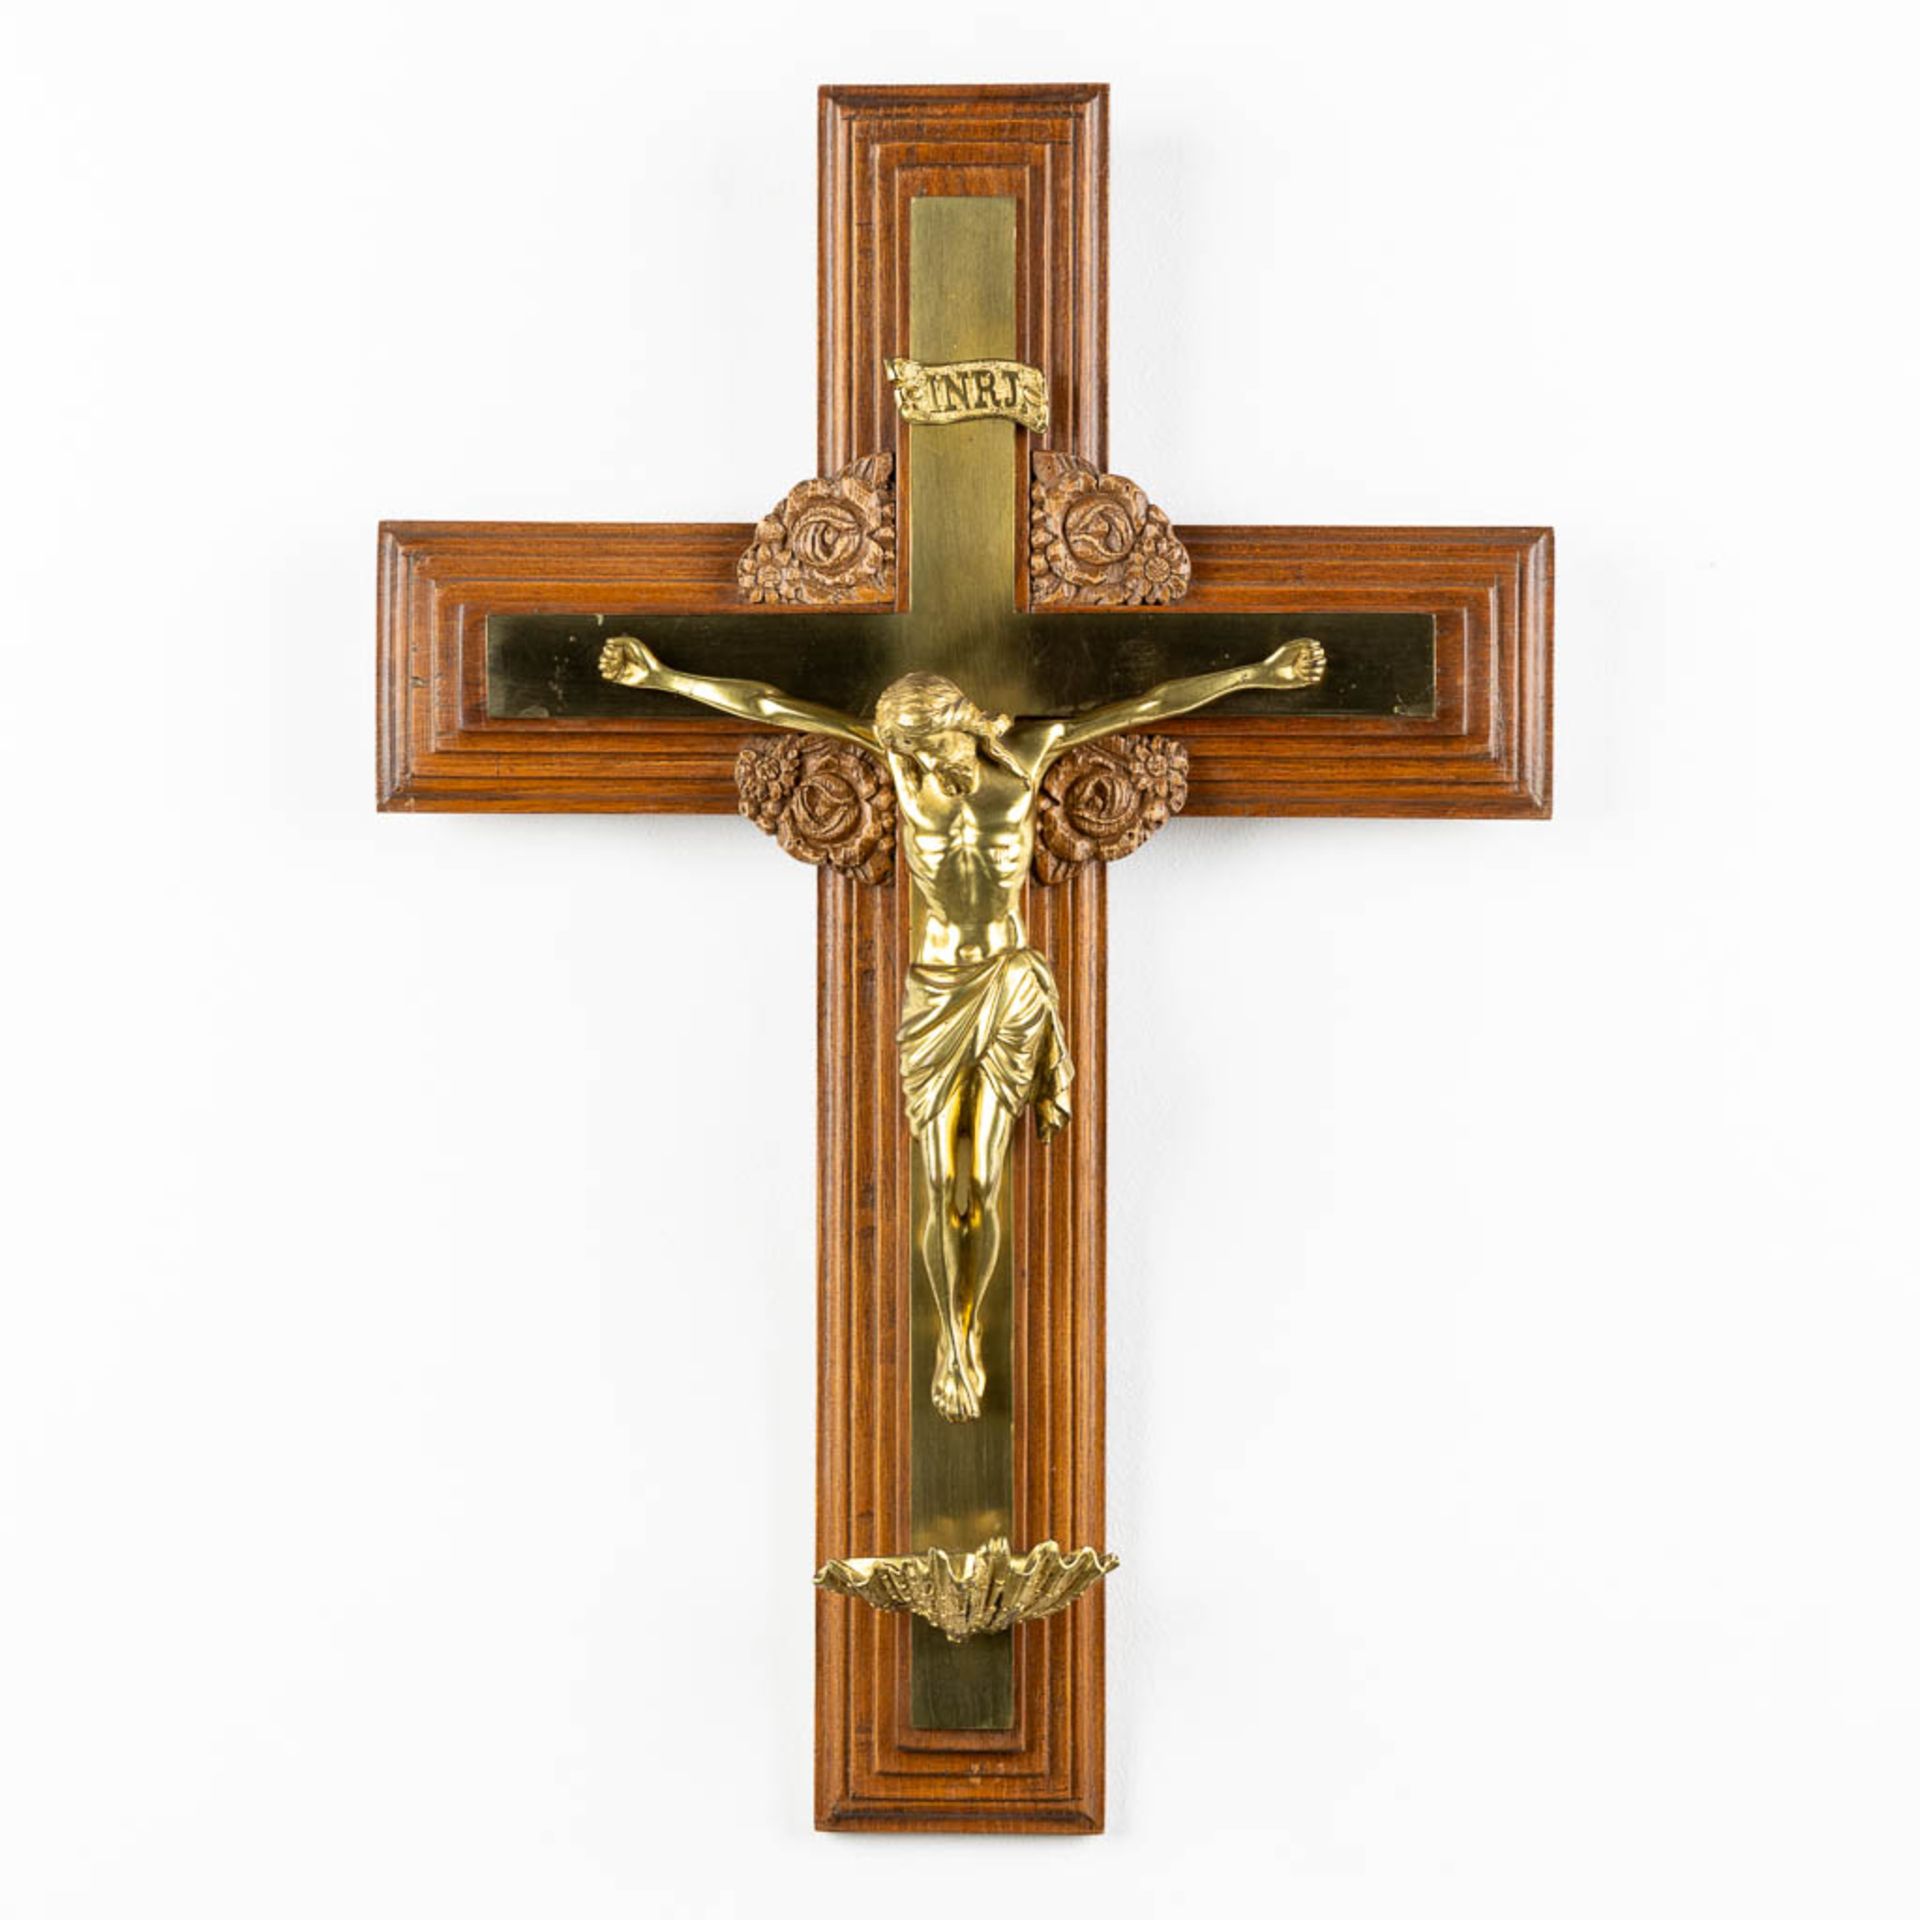 A crucifix with small holy water font, bronze mounted on wood. (W:41 x H:60 cm)